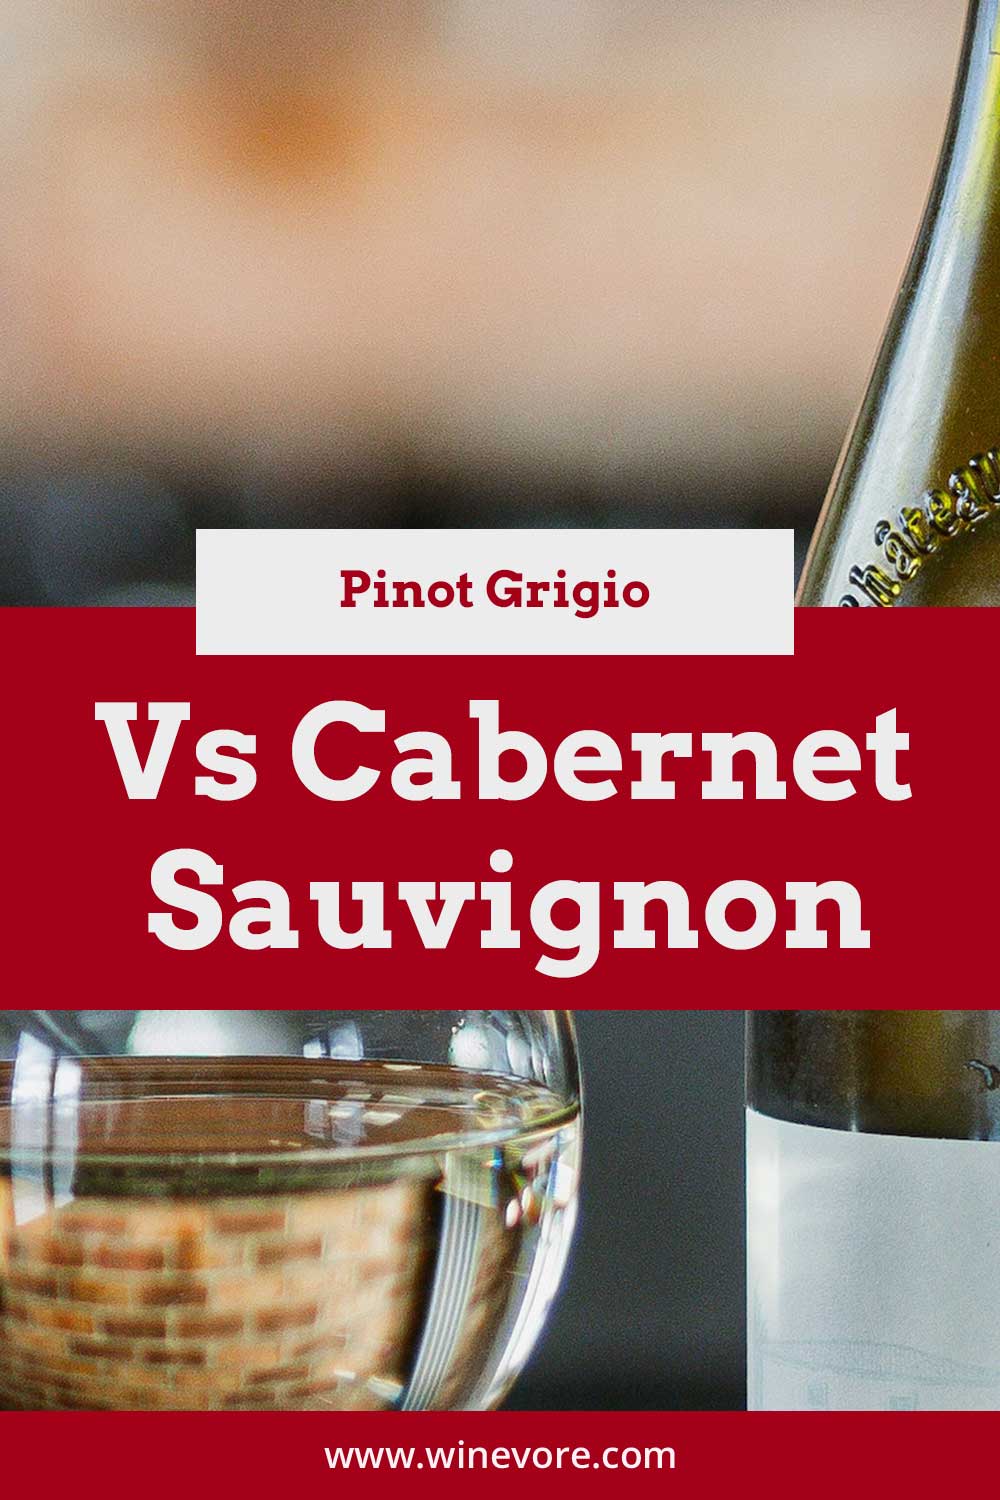 Close up of a glass of wine and a wine bottle - Pinot Grigio Vs Cabernet Sauvignon.